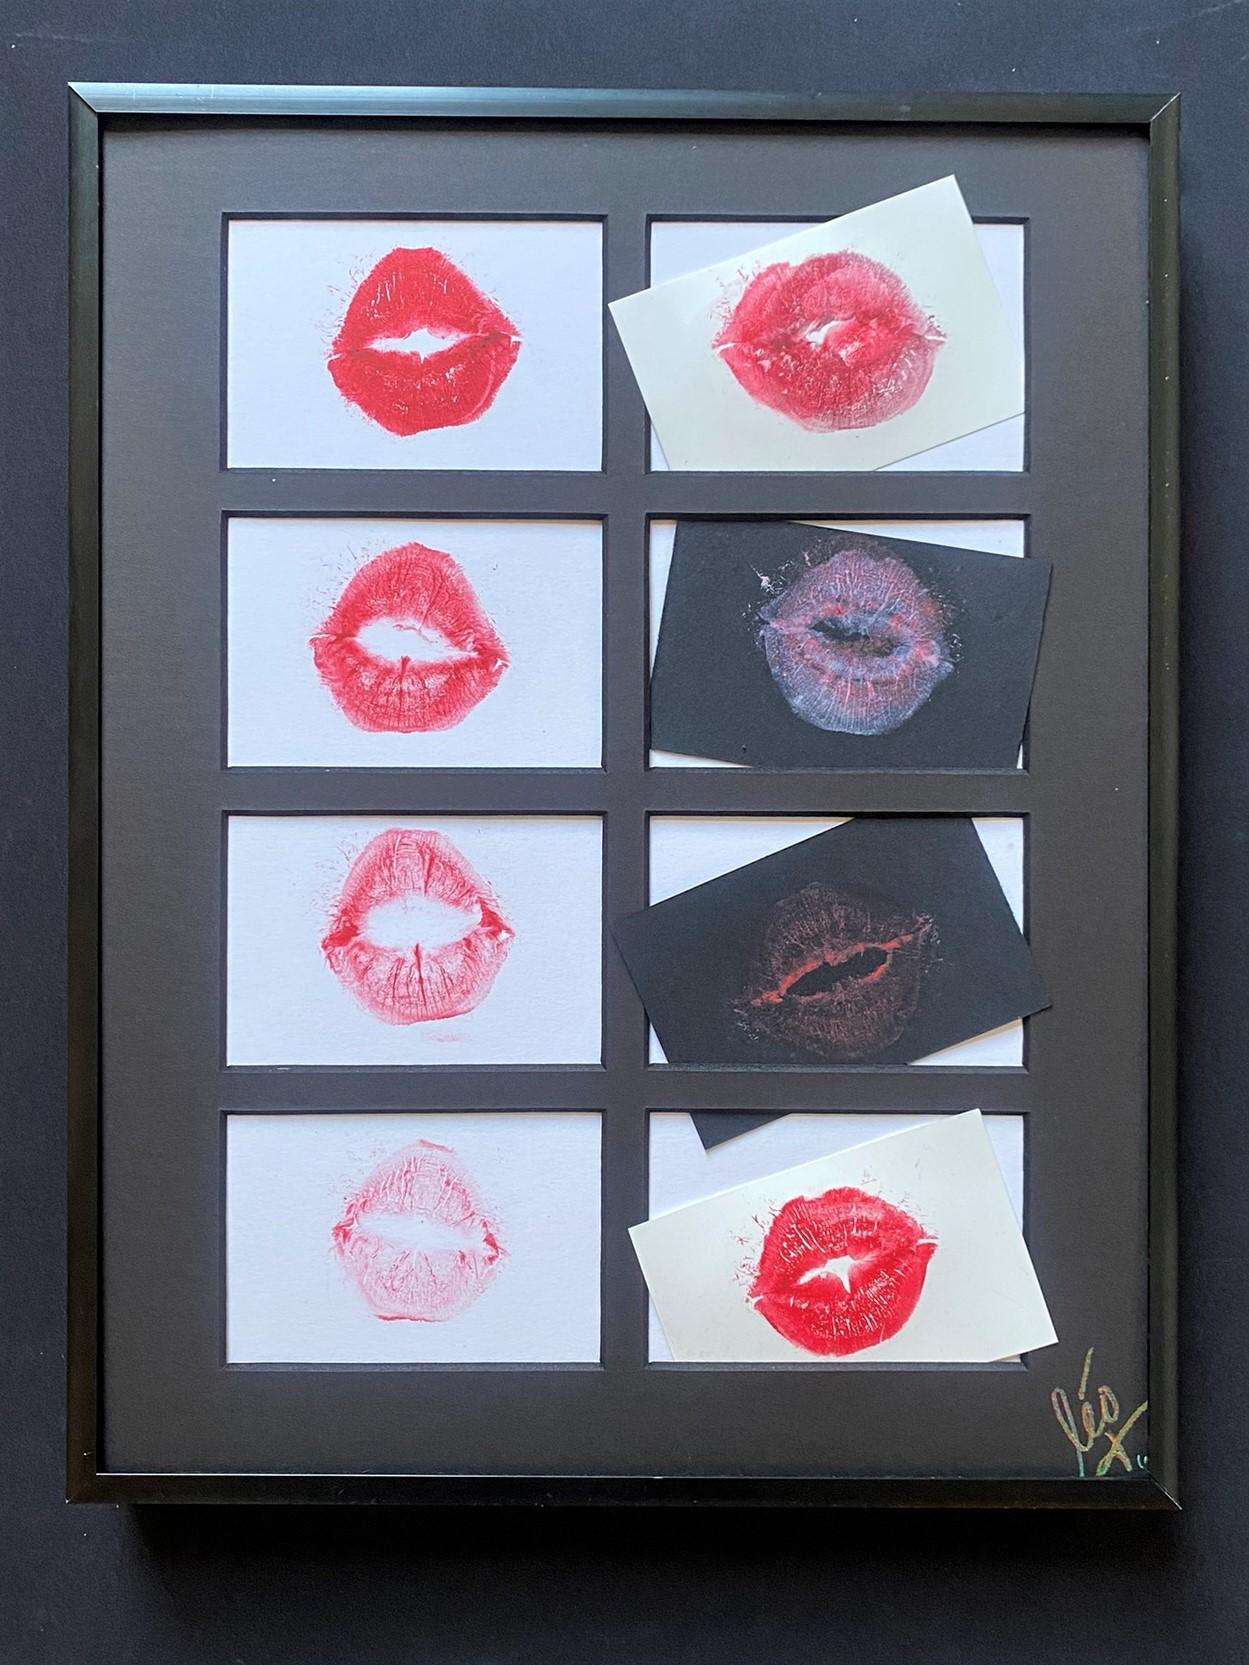 Makeup on business cards
Artwork Unique

“Kiss Me, Love Me” is the fourth of a continuing “ILYSFM” series which explores femininity, love & beauty, drag, and attraction as iconic symbolism. Inspired by drag queens, femininity, and the iconography of